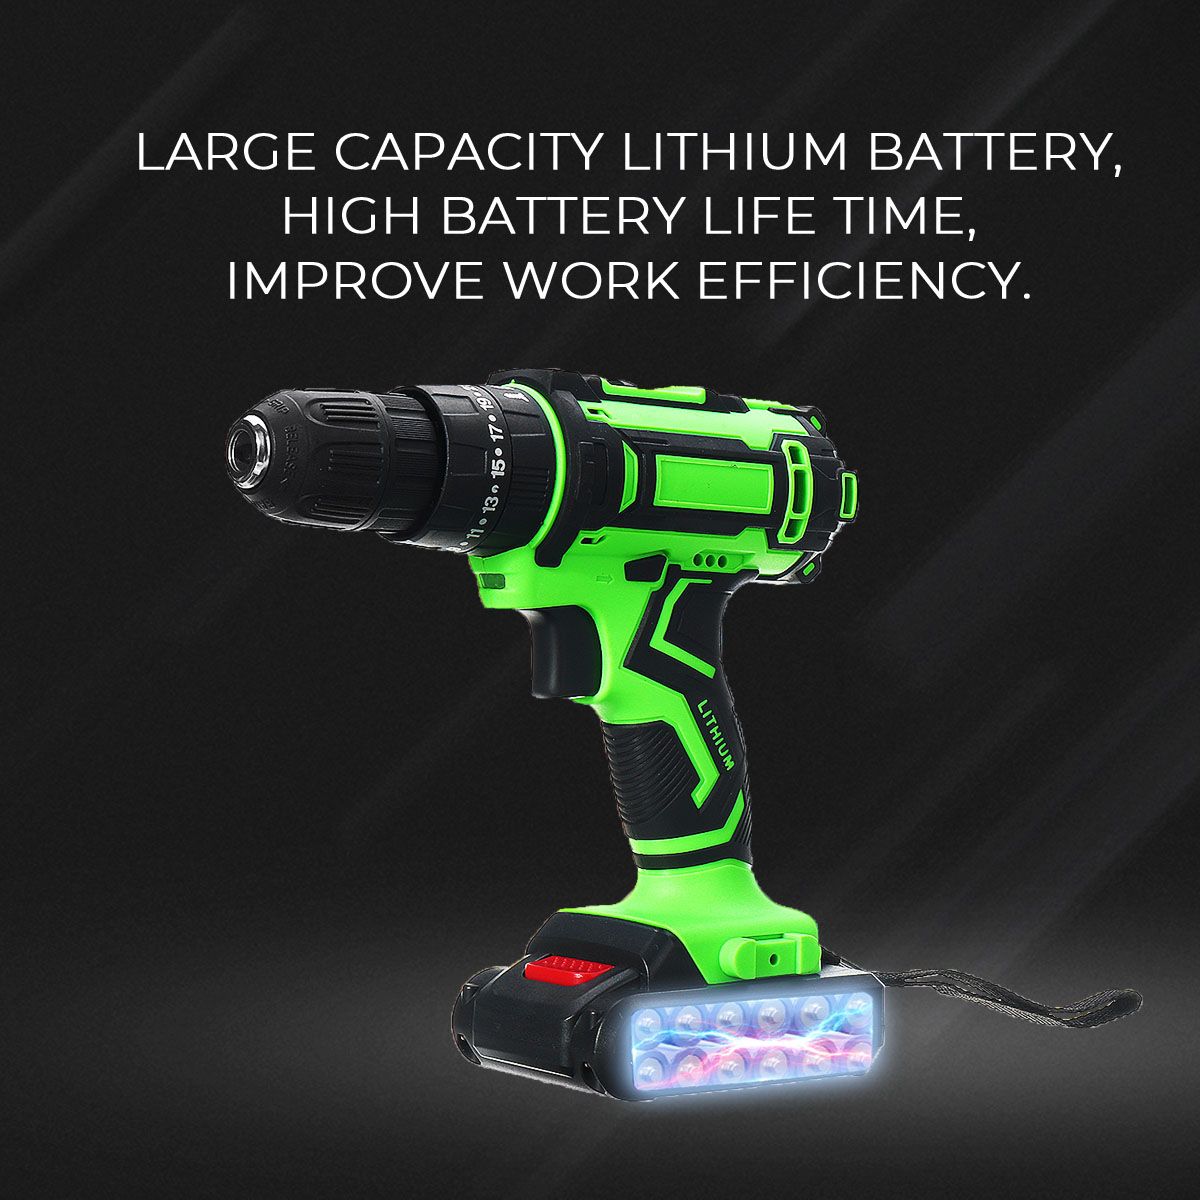 36V-Electric-Hand-Drill-Driver-253-Torque-Setting-Power-Drilling-DIY-Work-W-1-Or-2-Li-ion-battery-1582717